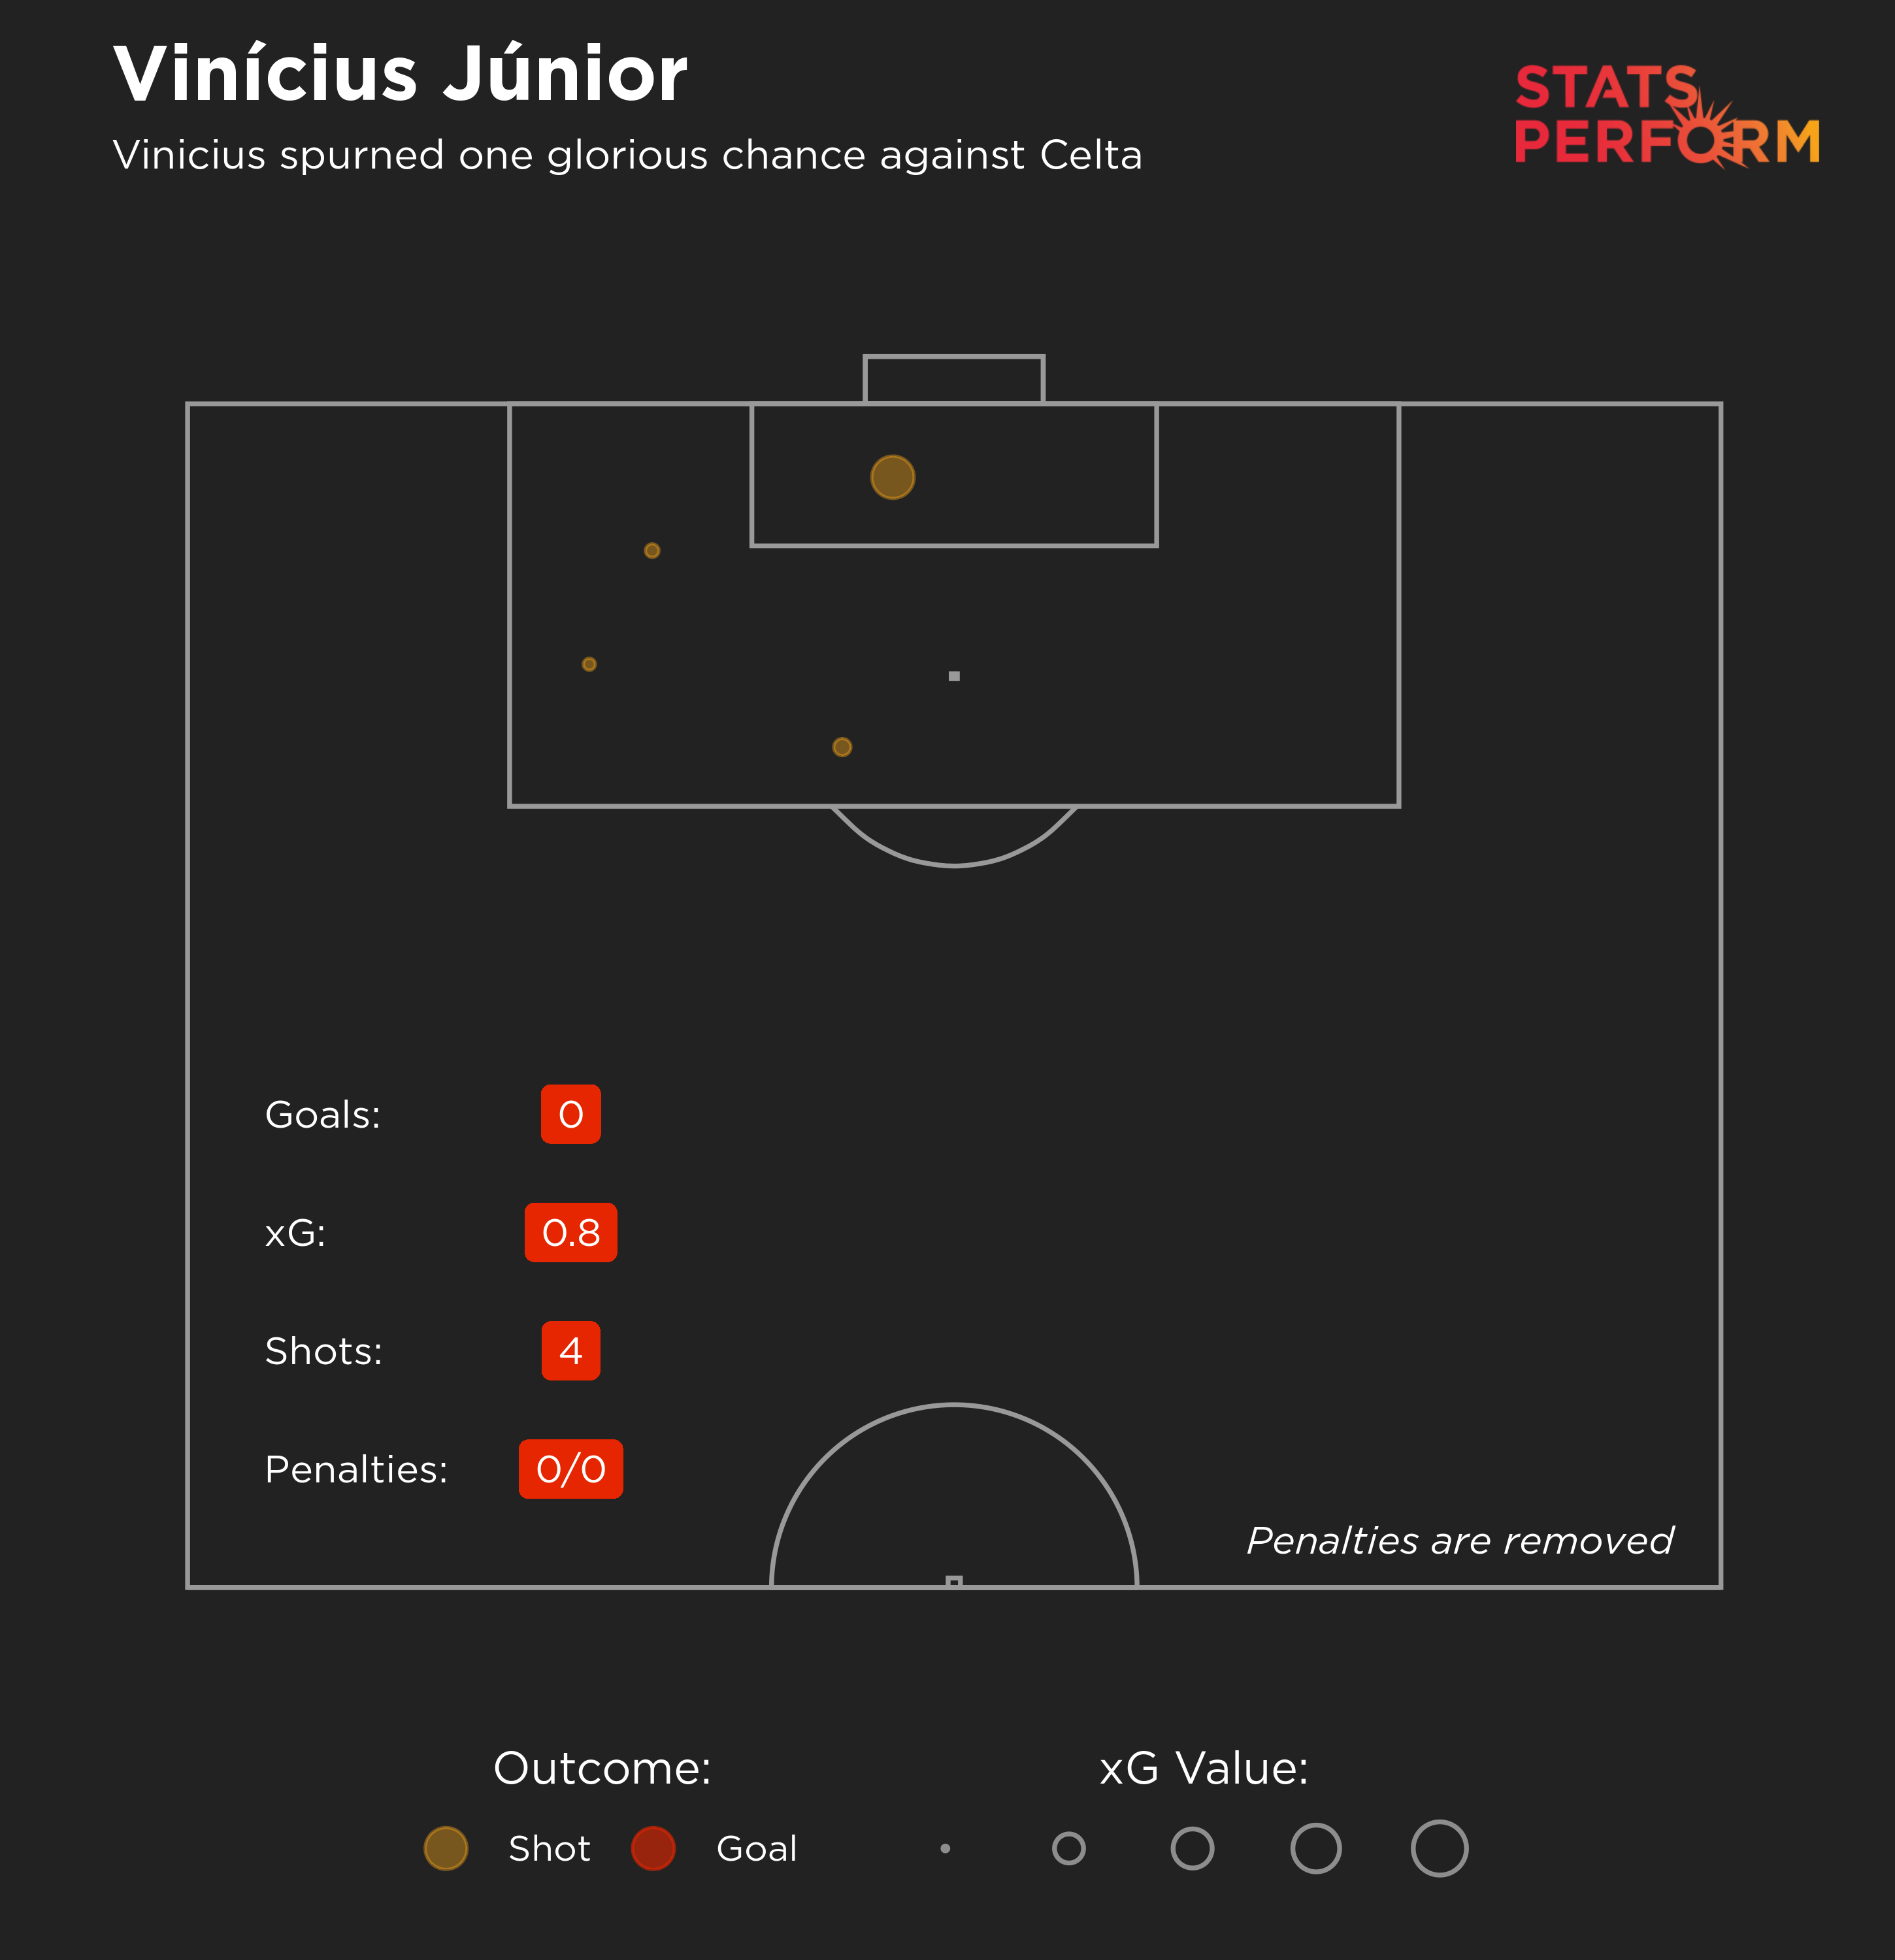 Vinicius Junior had four shots. None hit the target and he missed a glorious chance